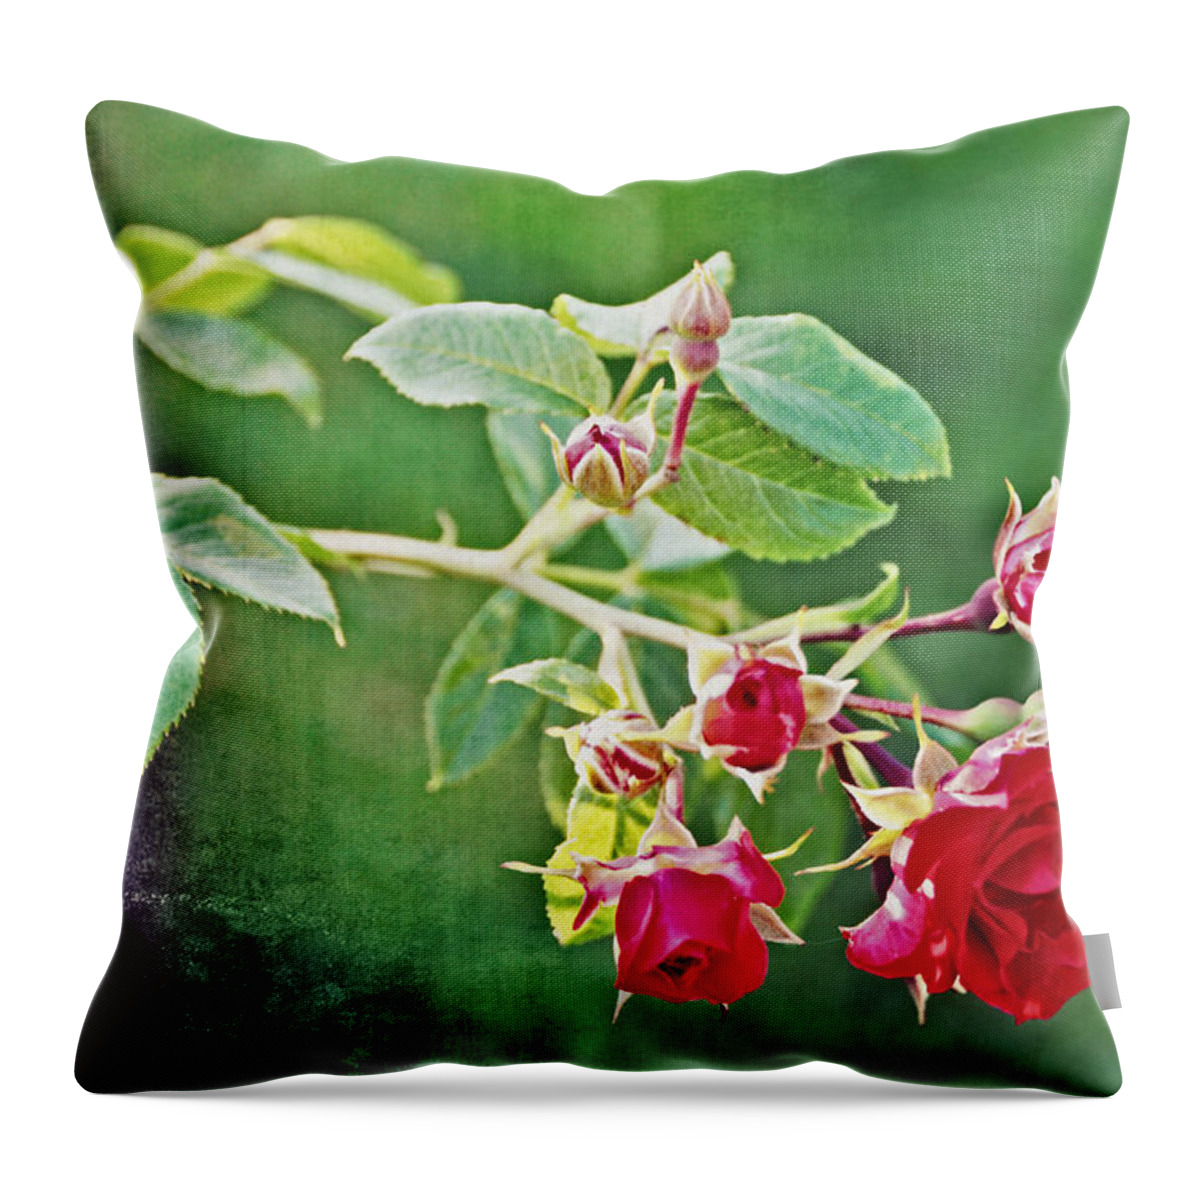 Rose Throw Pillow featuring the photograph Roses Are Red My Love by Mike Martin